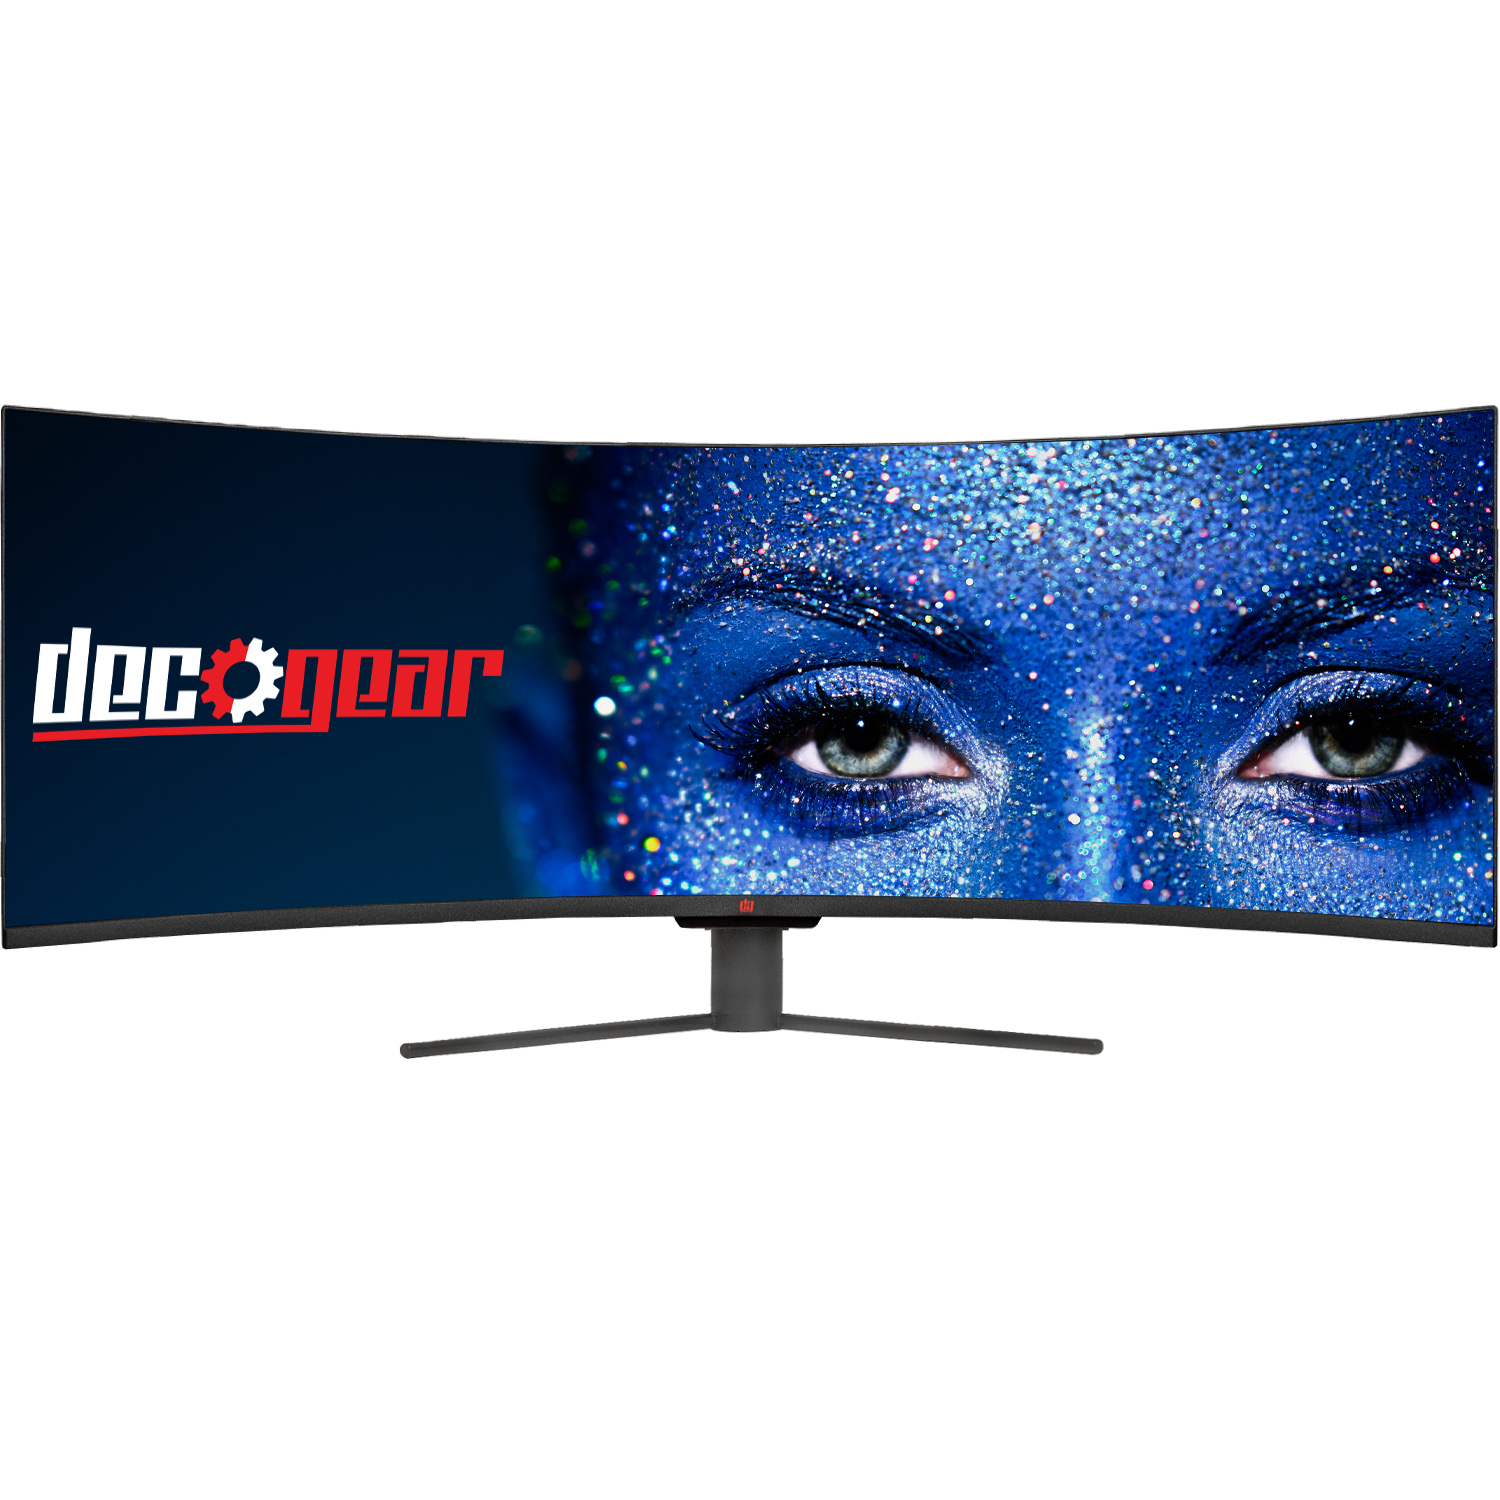 Deco Gear 49" Curved Ultrawide E-LED Gaming Monitor, 32:9 Aspect Ratio, Immersive 3840x1080 Resolution, 144Hz Refresh Rate, 3000:1 Contrast Ratio (DGVIEW490) - image 1 of 7